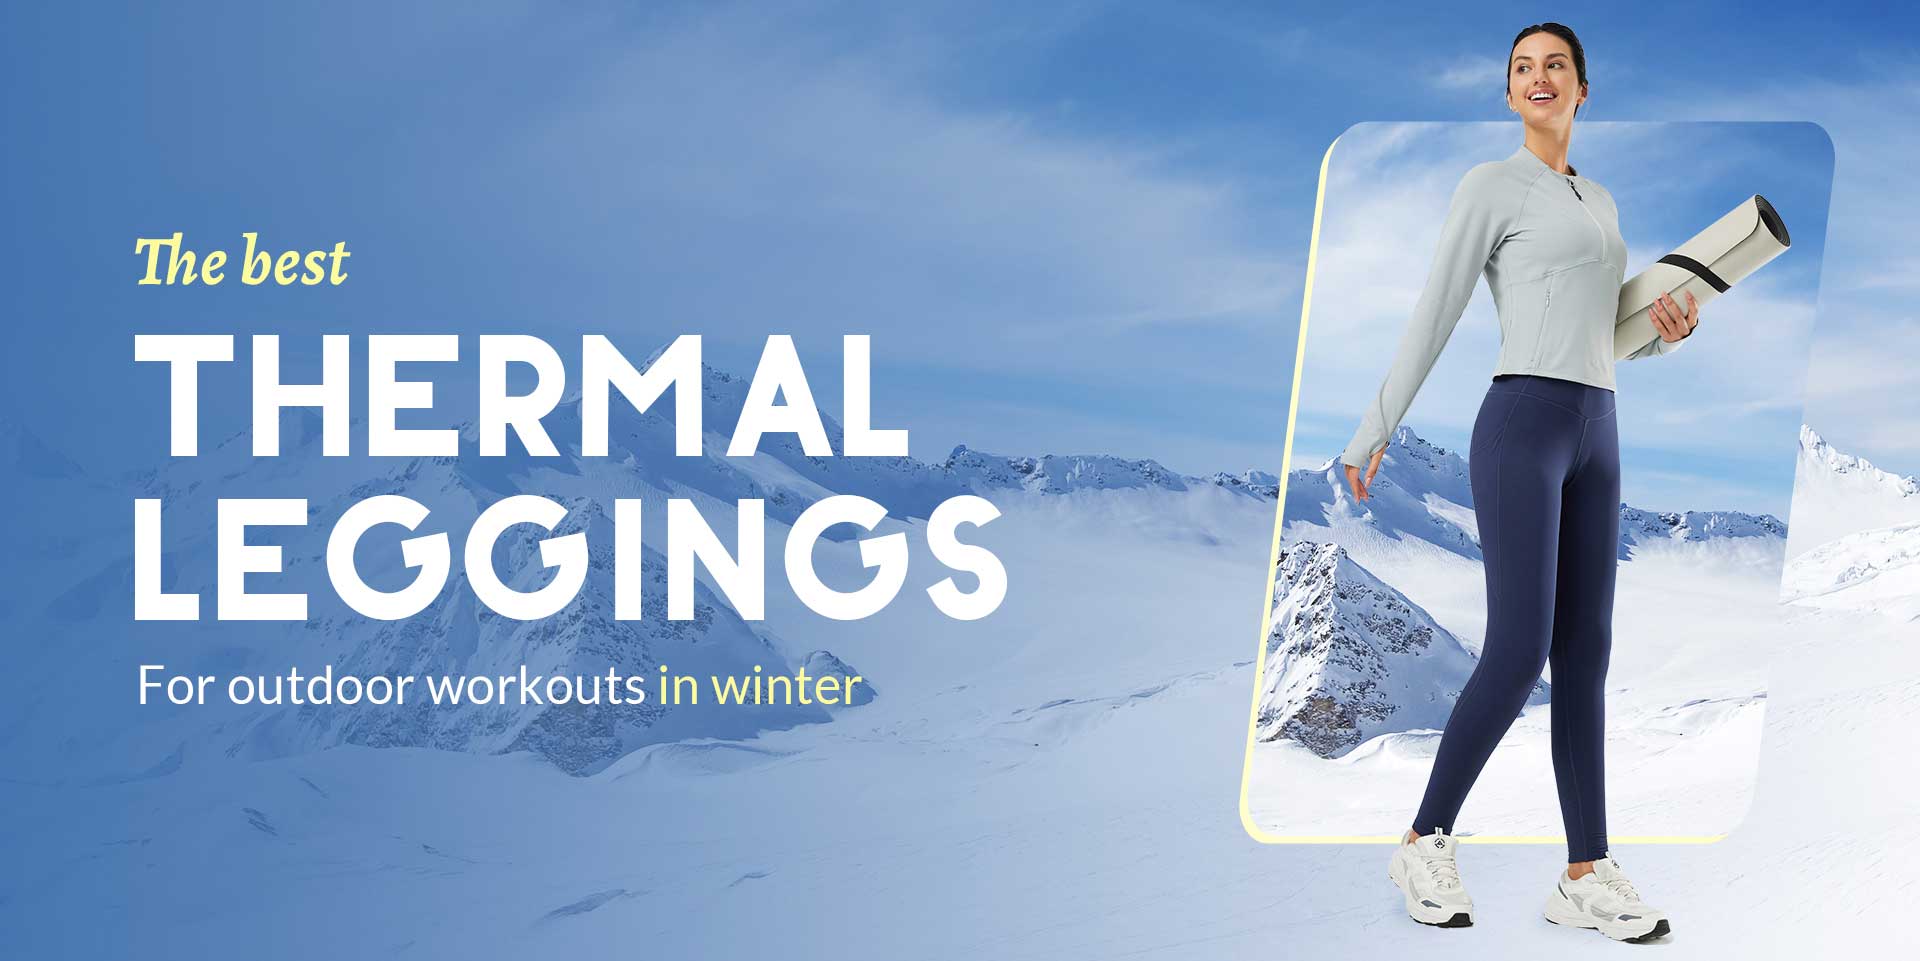 The best thermal leggings for outdoor workouts in winter – Baleaf Sports